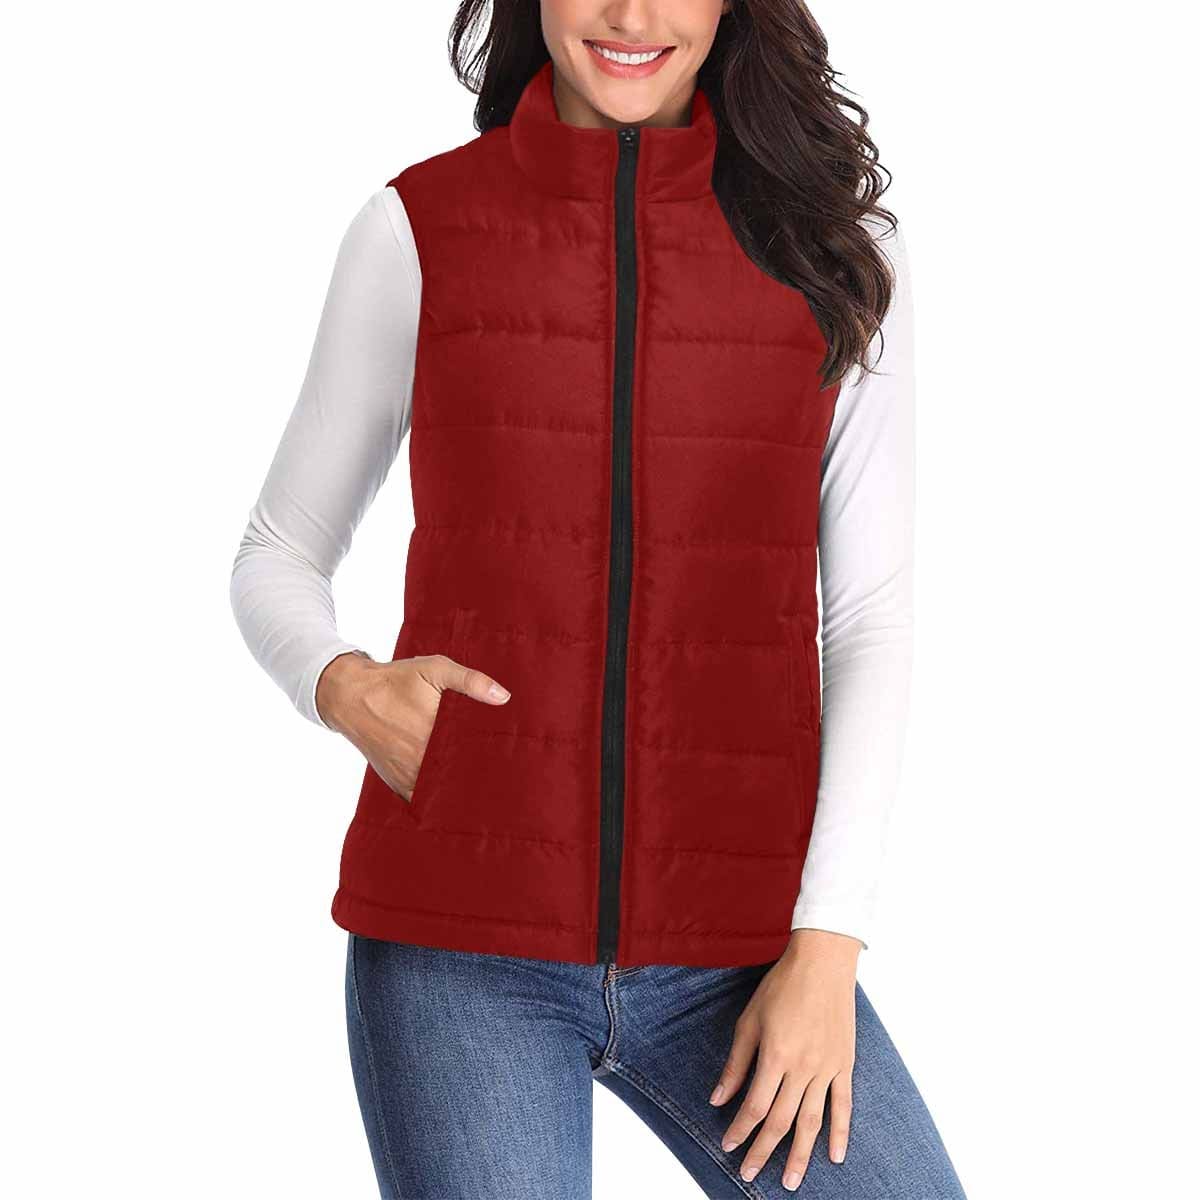 Womens Puffer Vest Jacket / Maroon Red - Womens | Jackets | Puffer Vests